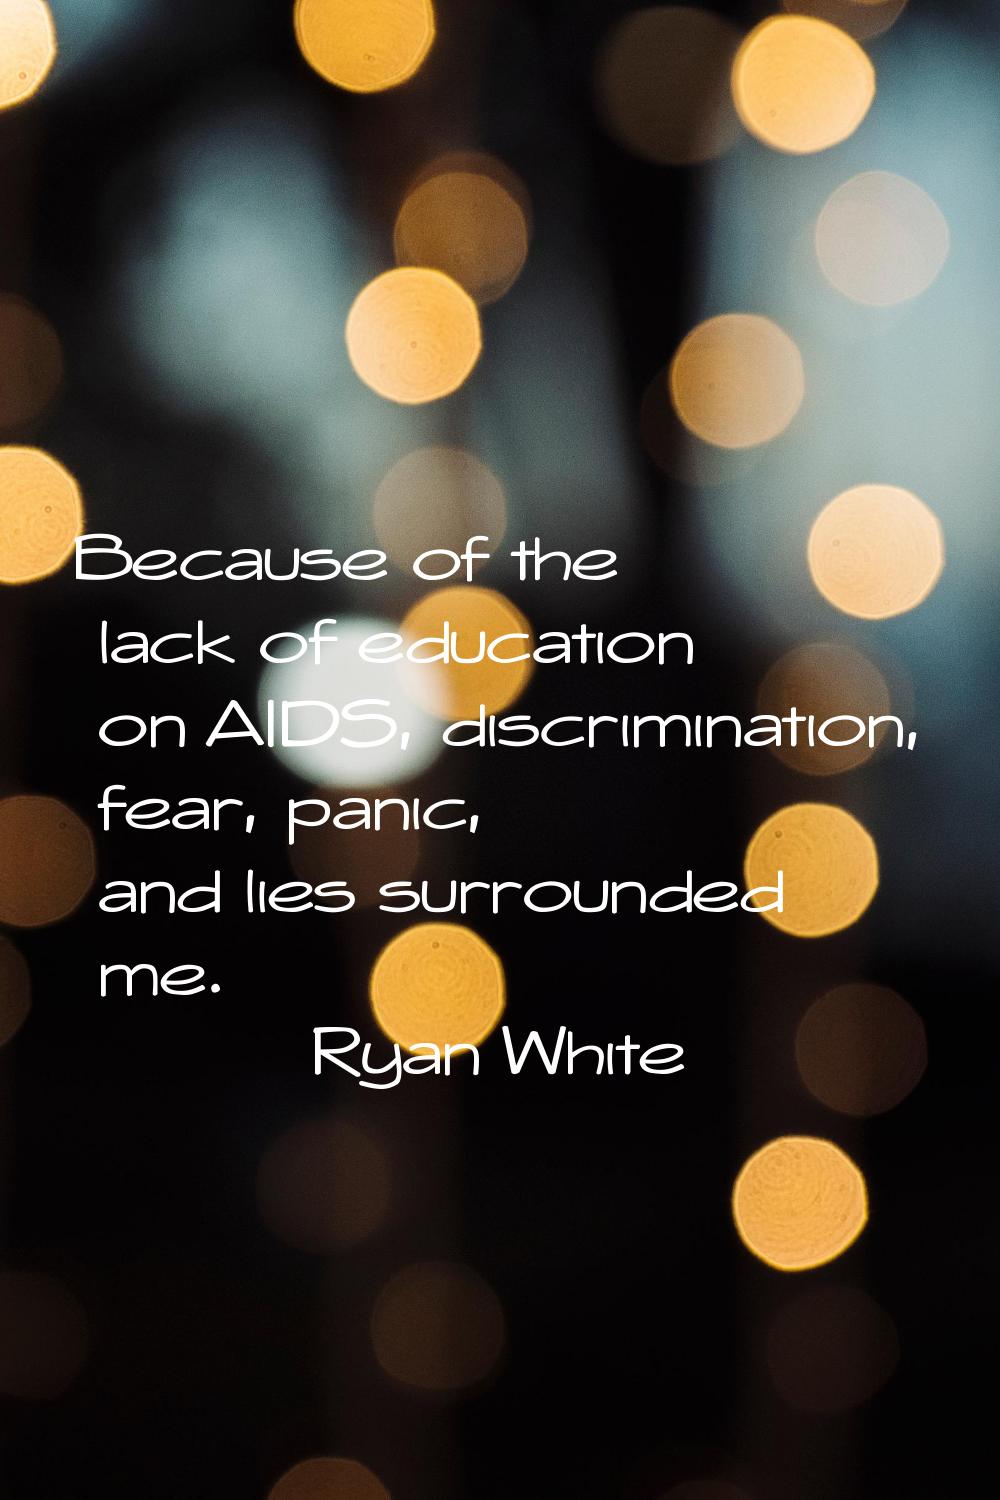 Because of the lack of education on AIDS, discrimination, fear, panic, and lies surrounded me.